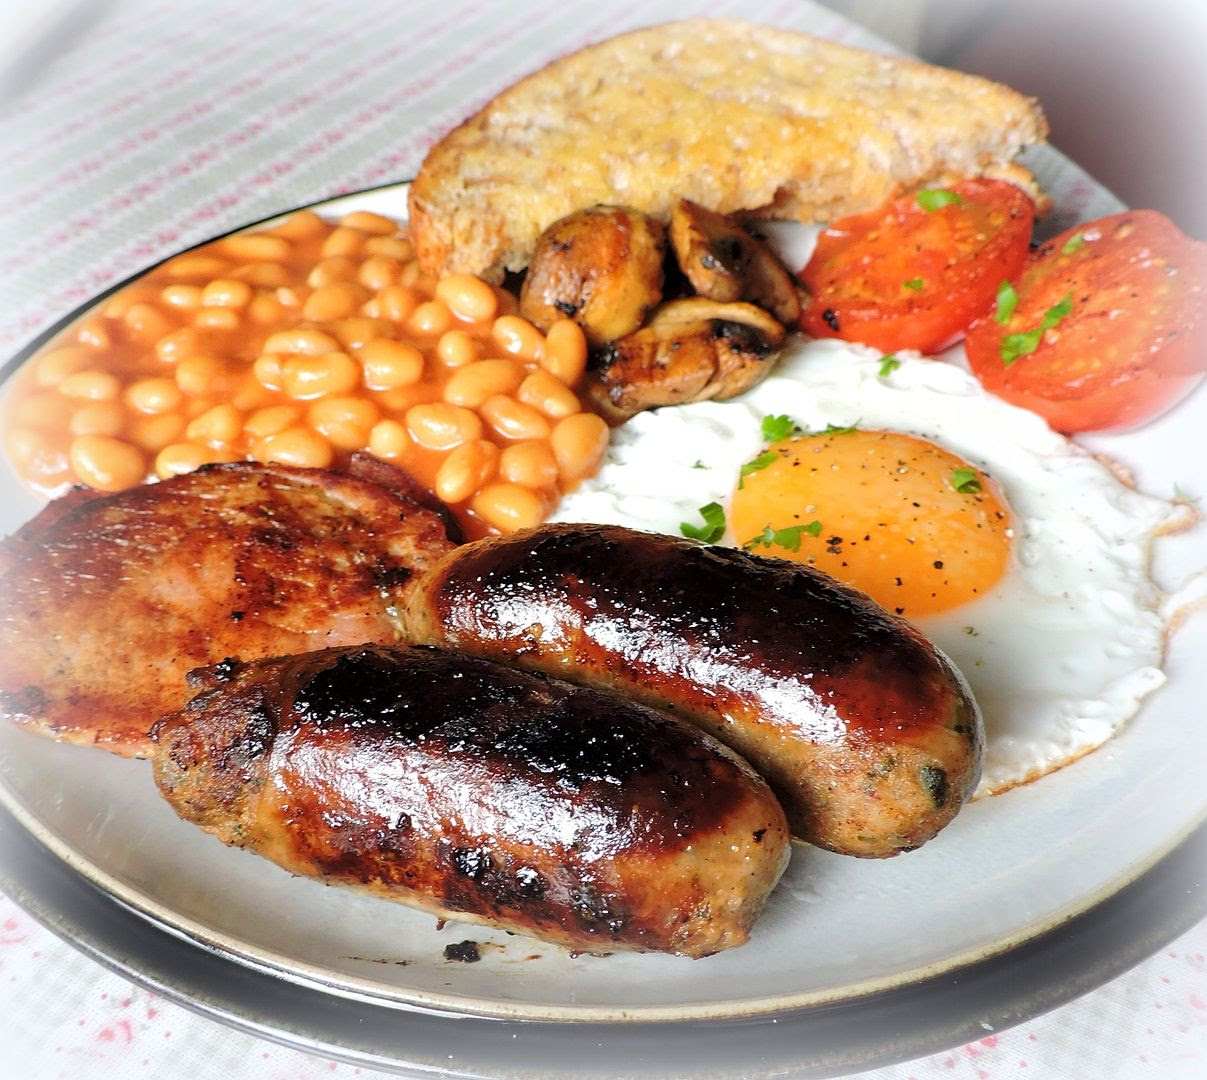 A Traditional British Fry Up